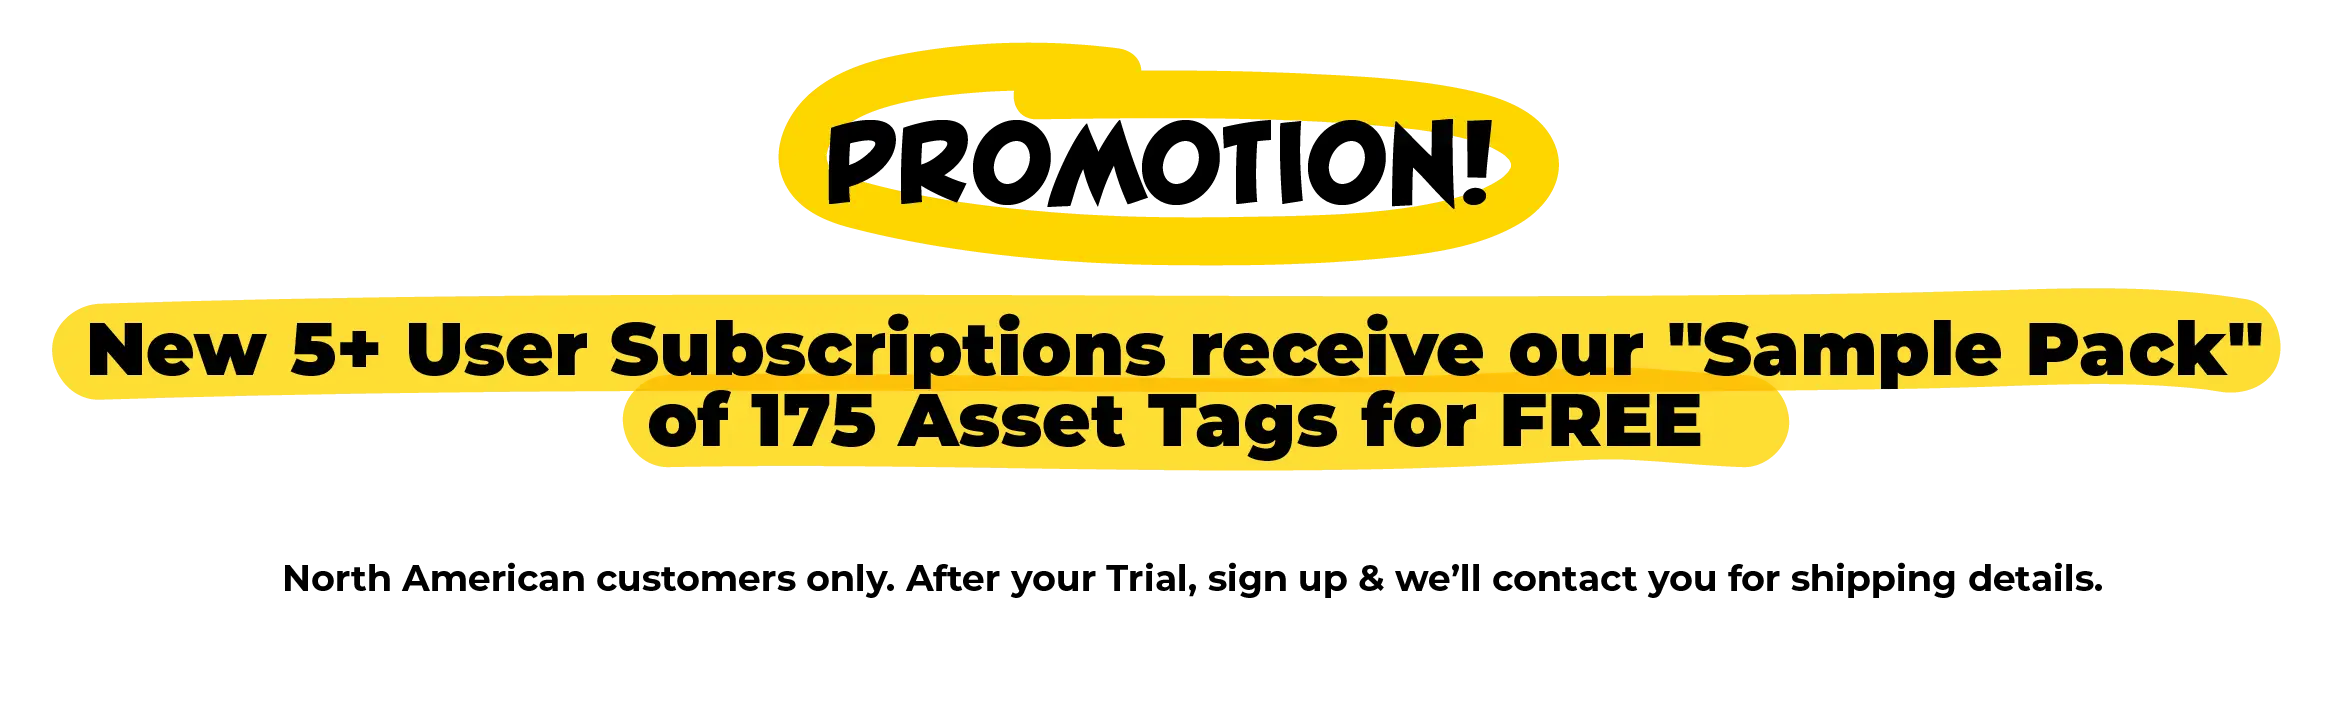 Promotion! New 5+ User Subscriptions receive our "Sample Pack" of 175 Asset Tags for FREE. North American customers only. After your Trial, sign up & we’ll contact you for shipping details.